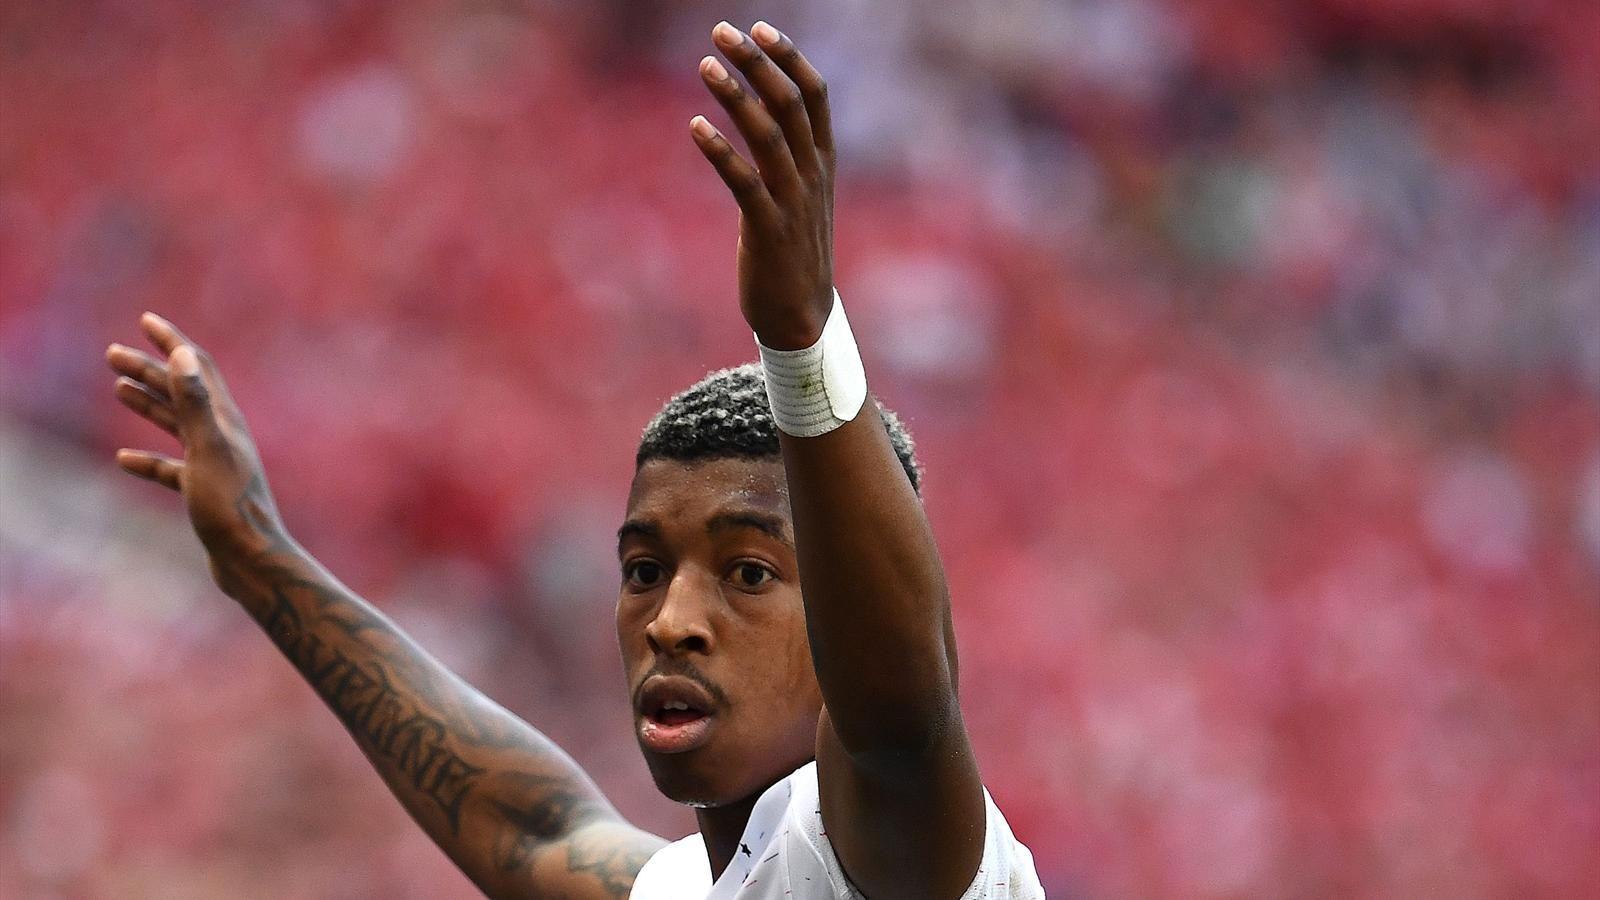 Kimpembe: We would like to play and score goals